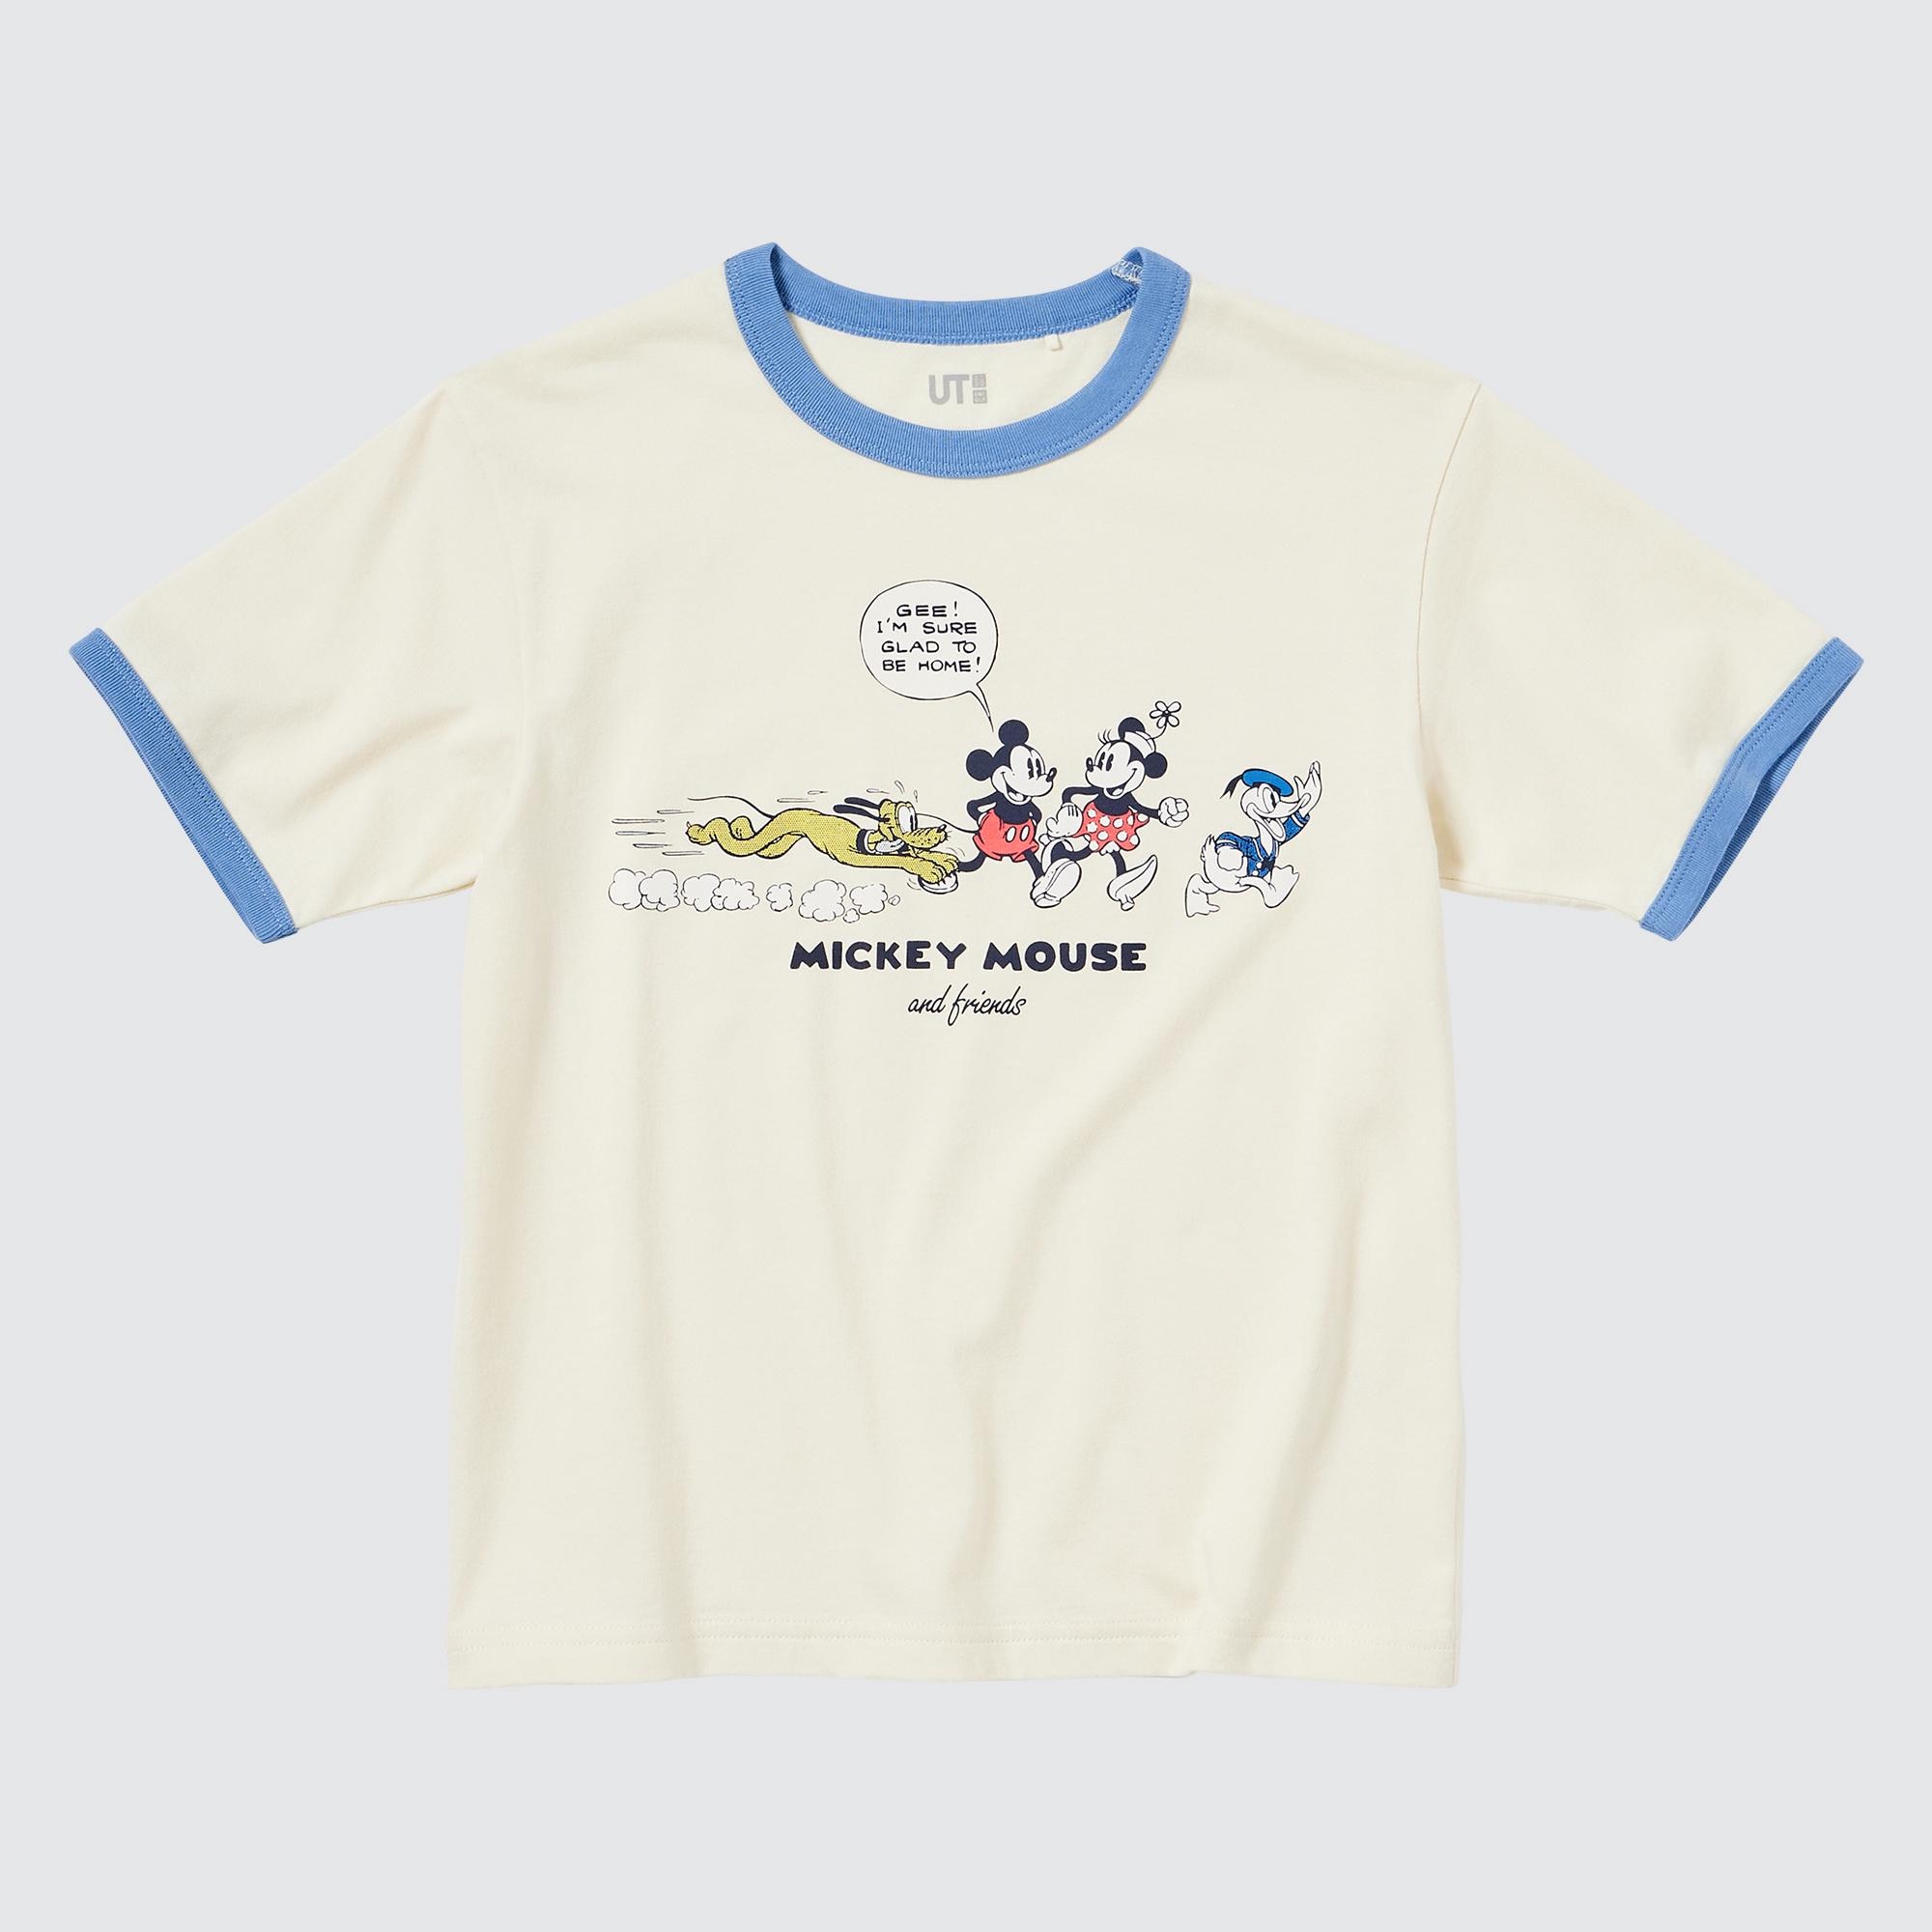 Win Up To 20000 By Designing a Disney TShirt  AllEarsNet